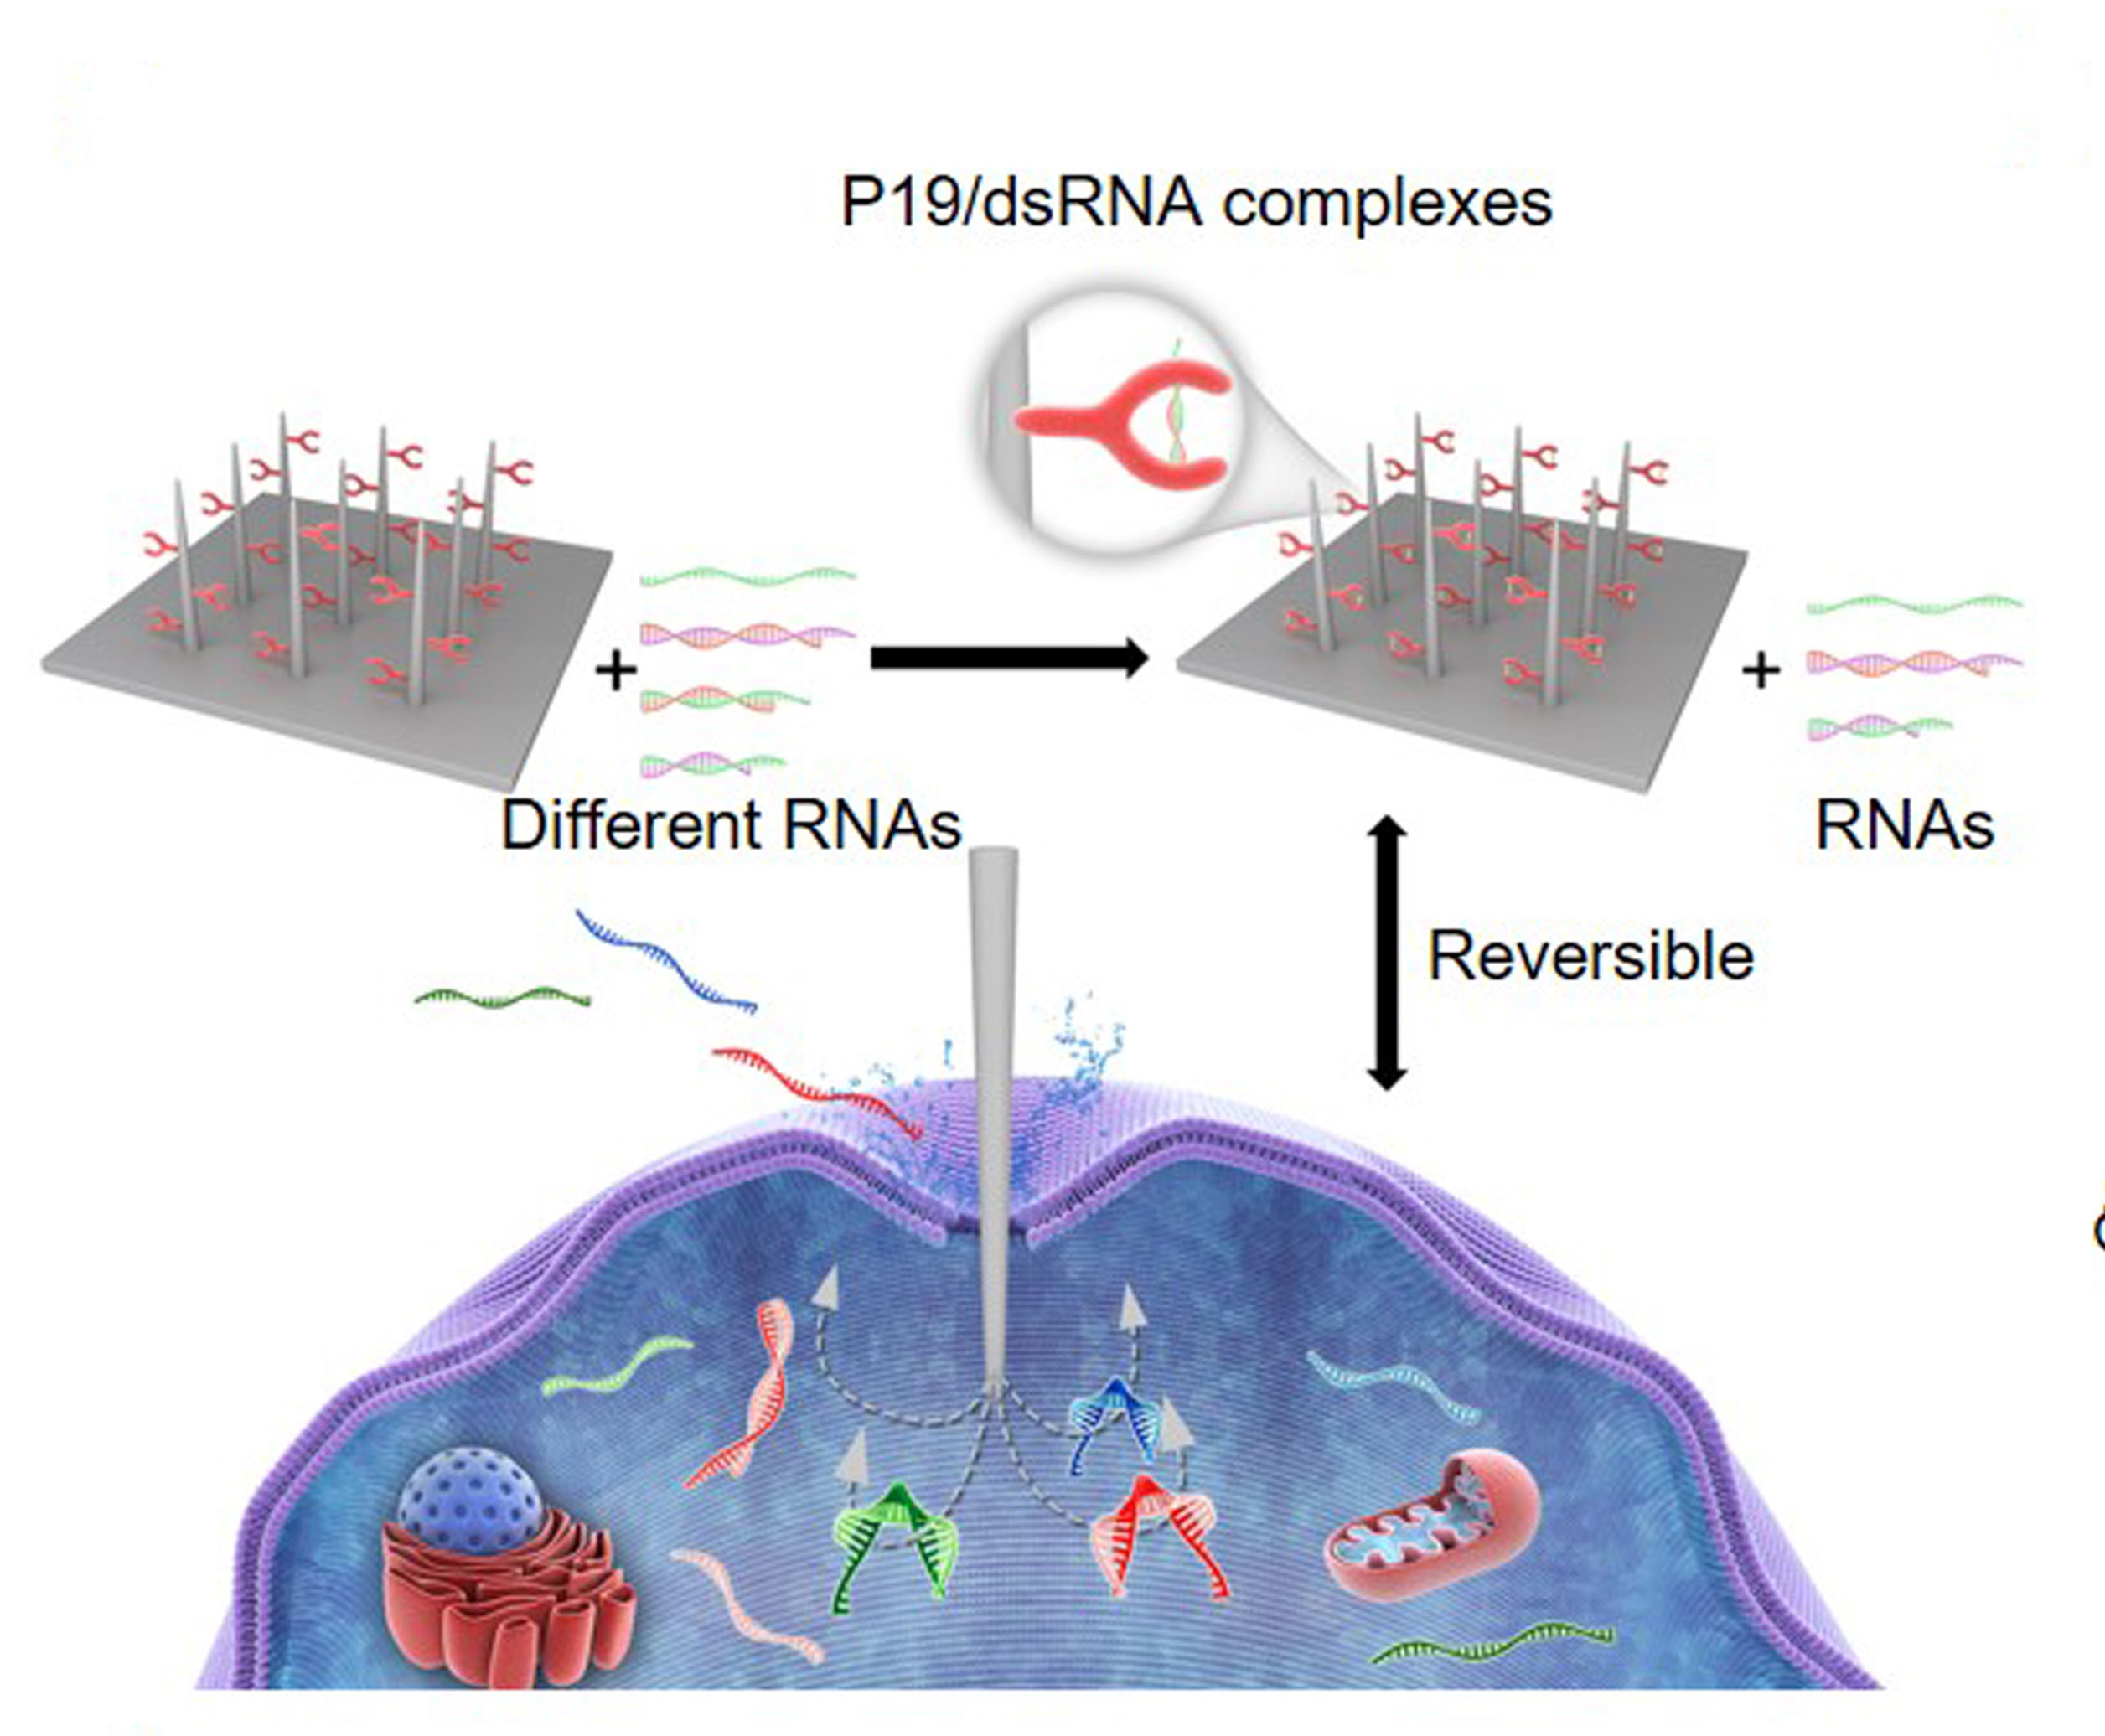 Fishing miRNAs from individual living cells